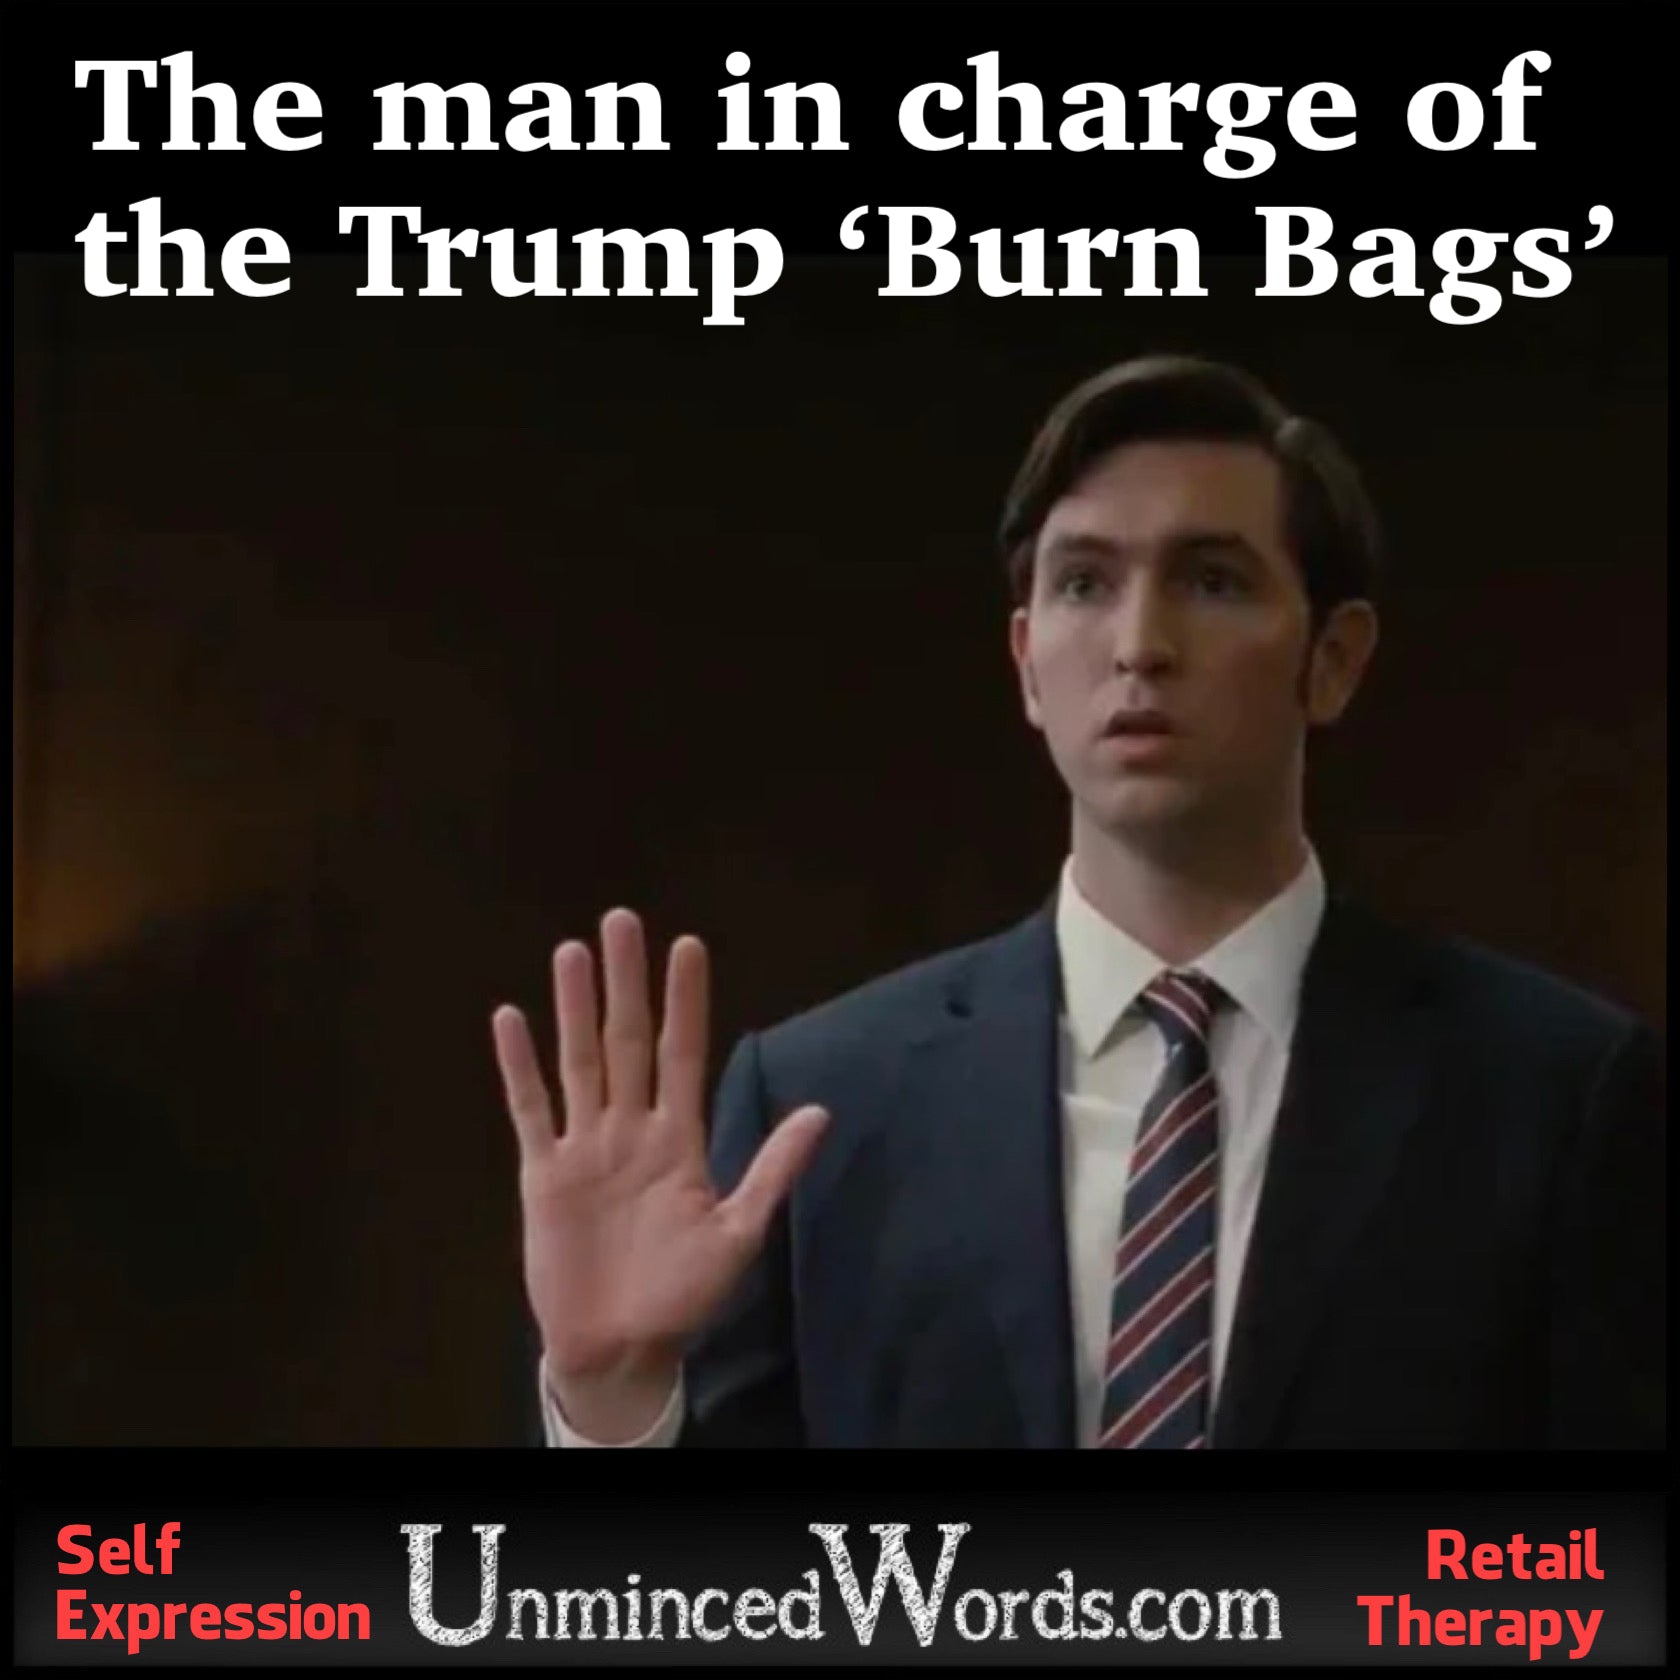 The man in charge of the Trump Burn Bags: